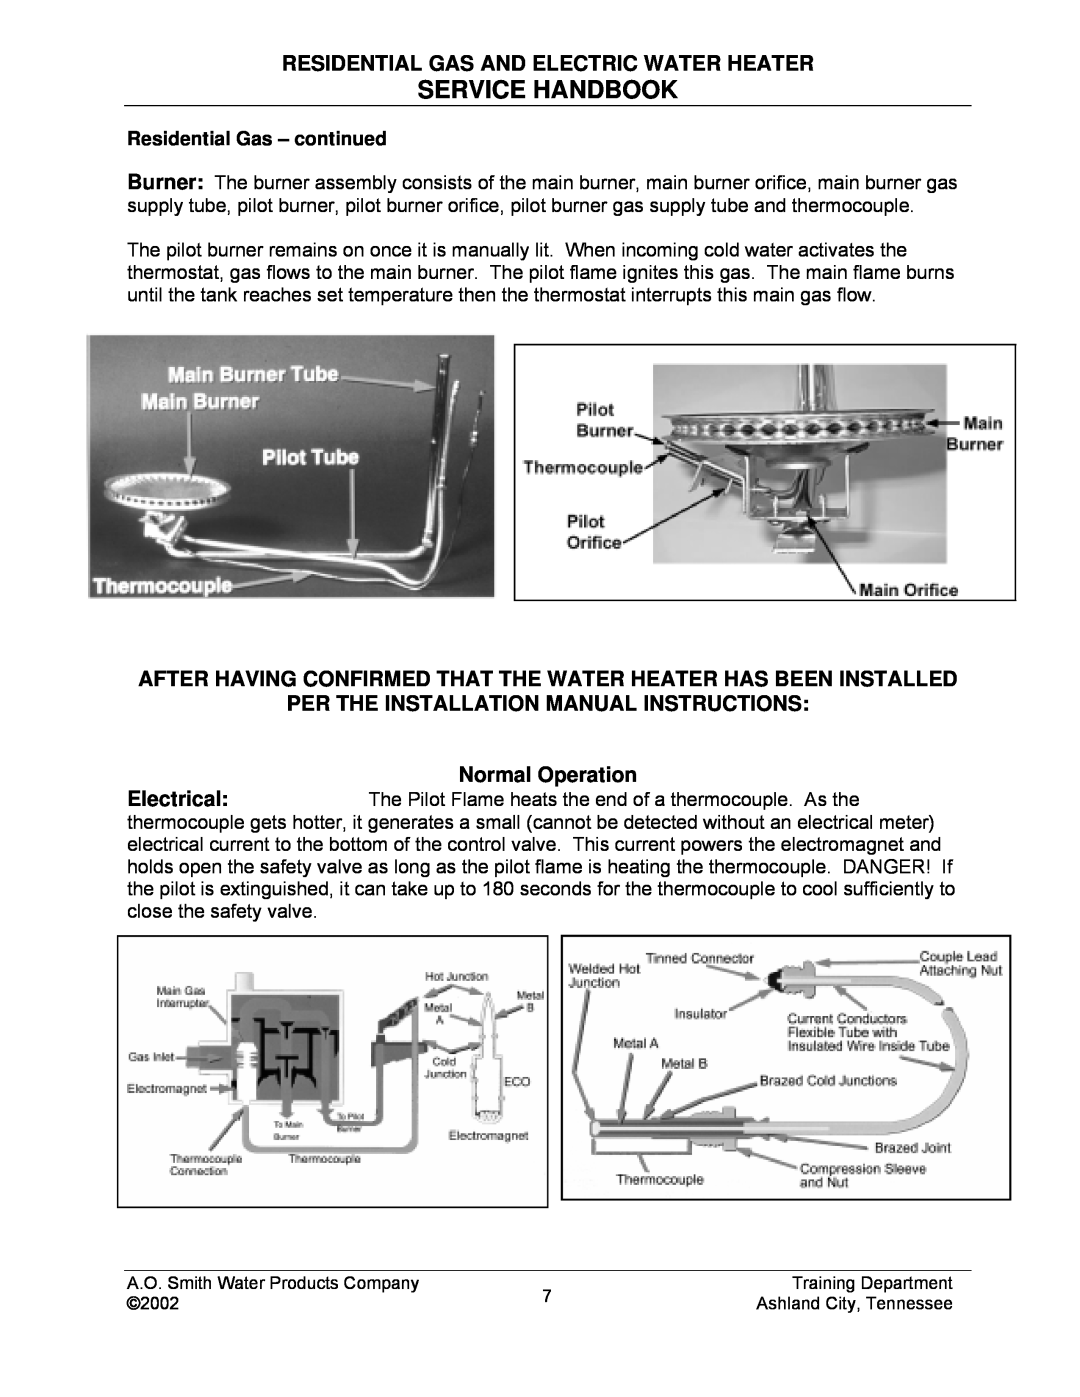 A.O. Smith TC-049-R2 manual Service Handbook, Residential Gas And Electric Water Heater, Residential Gas - continued 